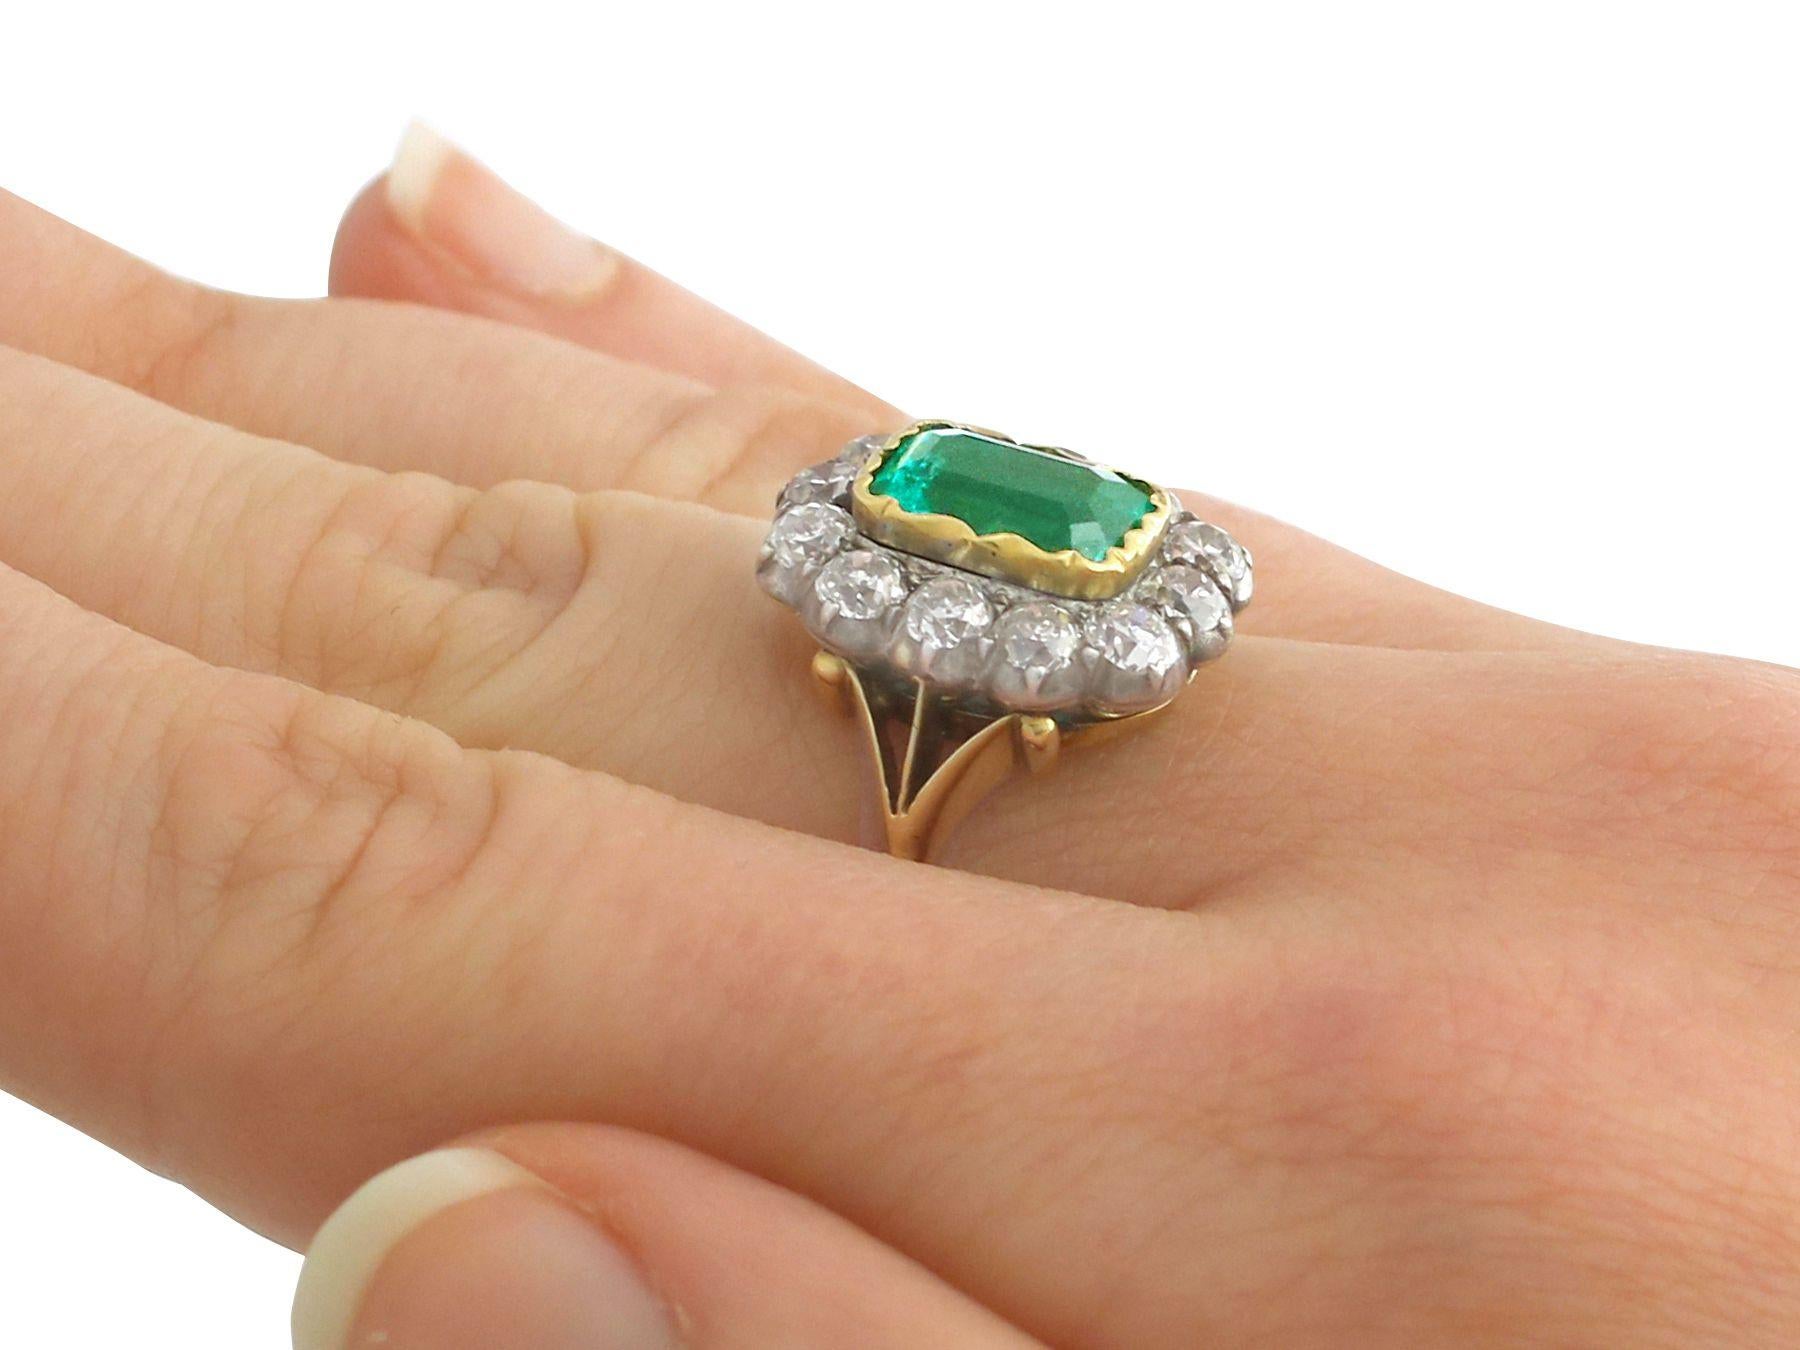 Antique 2 Carat Colombian Emerald & 2.2 Carat Diamond Yellow Gold Cocktail Ring In Excellent Condition For Sale In Jesmond, Newcastle Upon Tyne